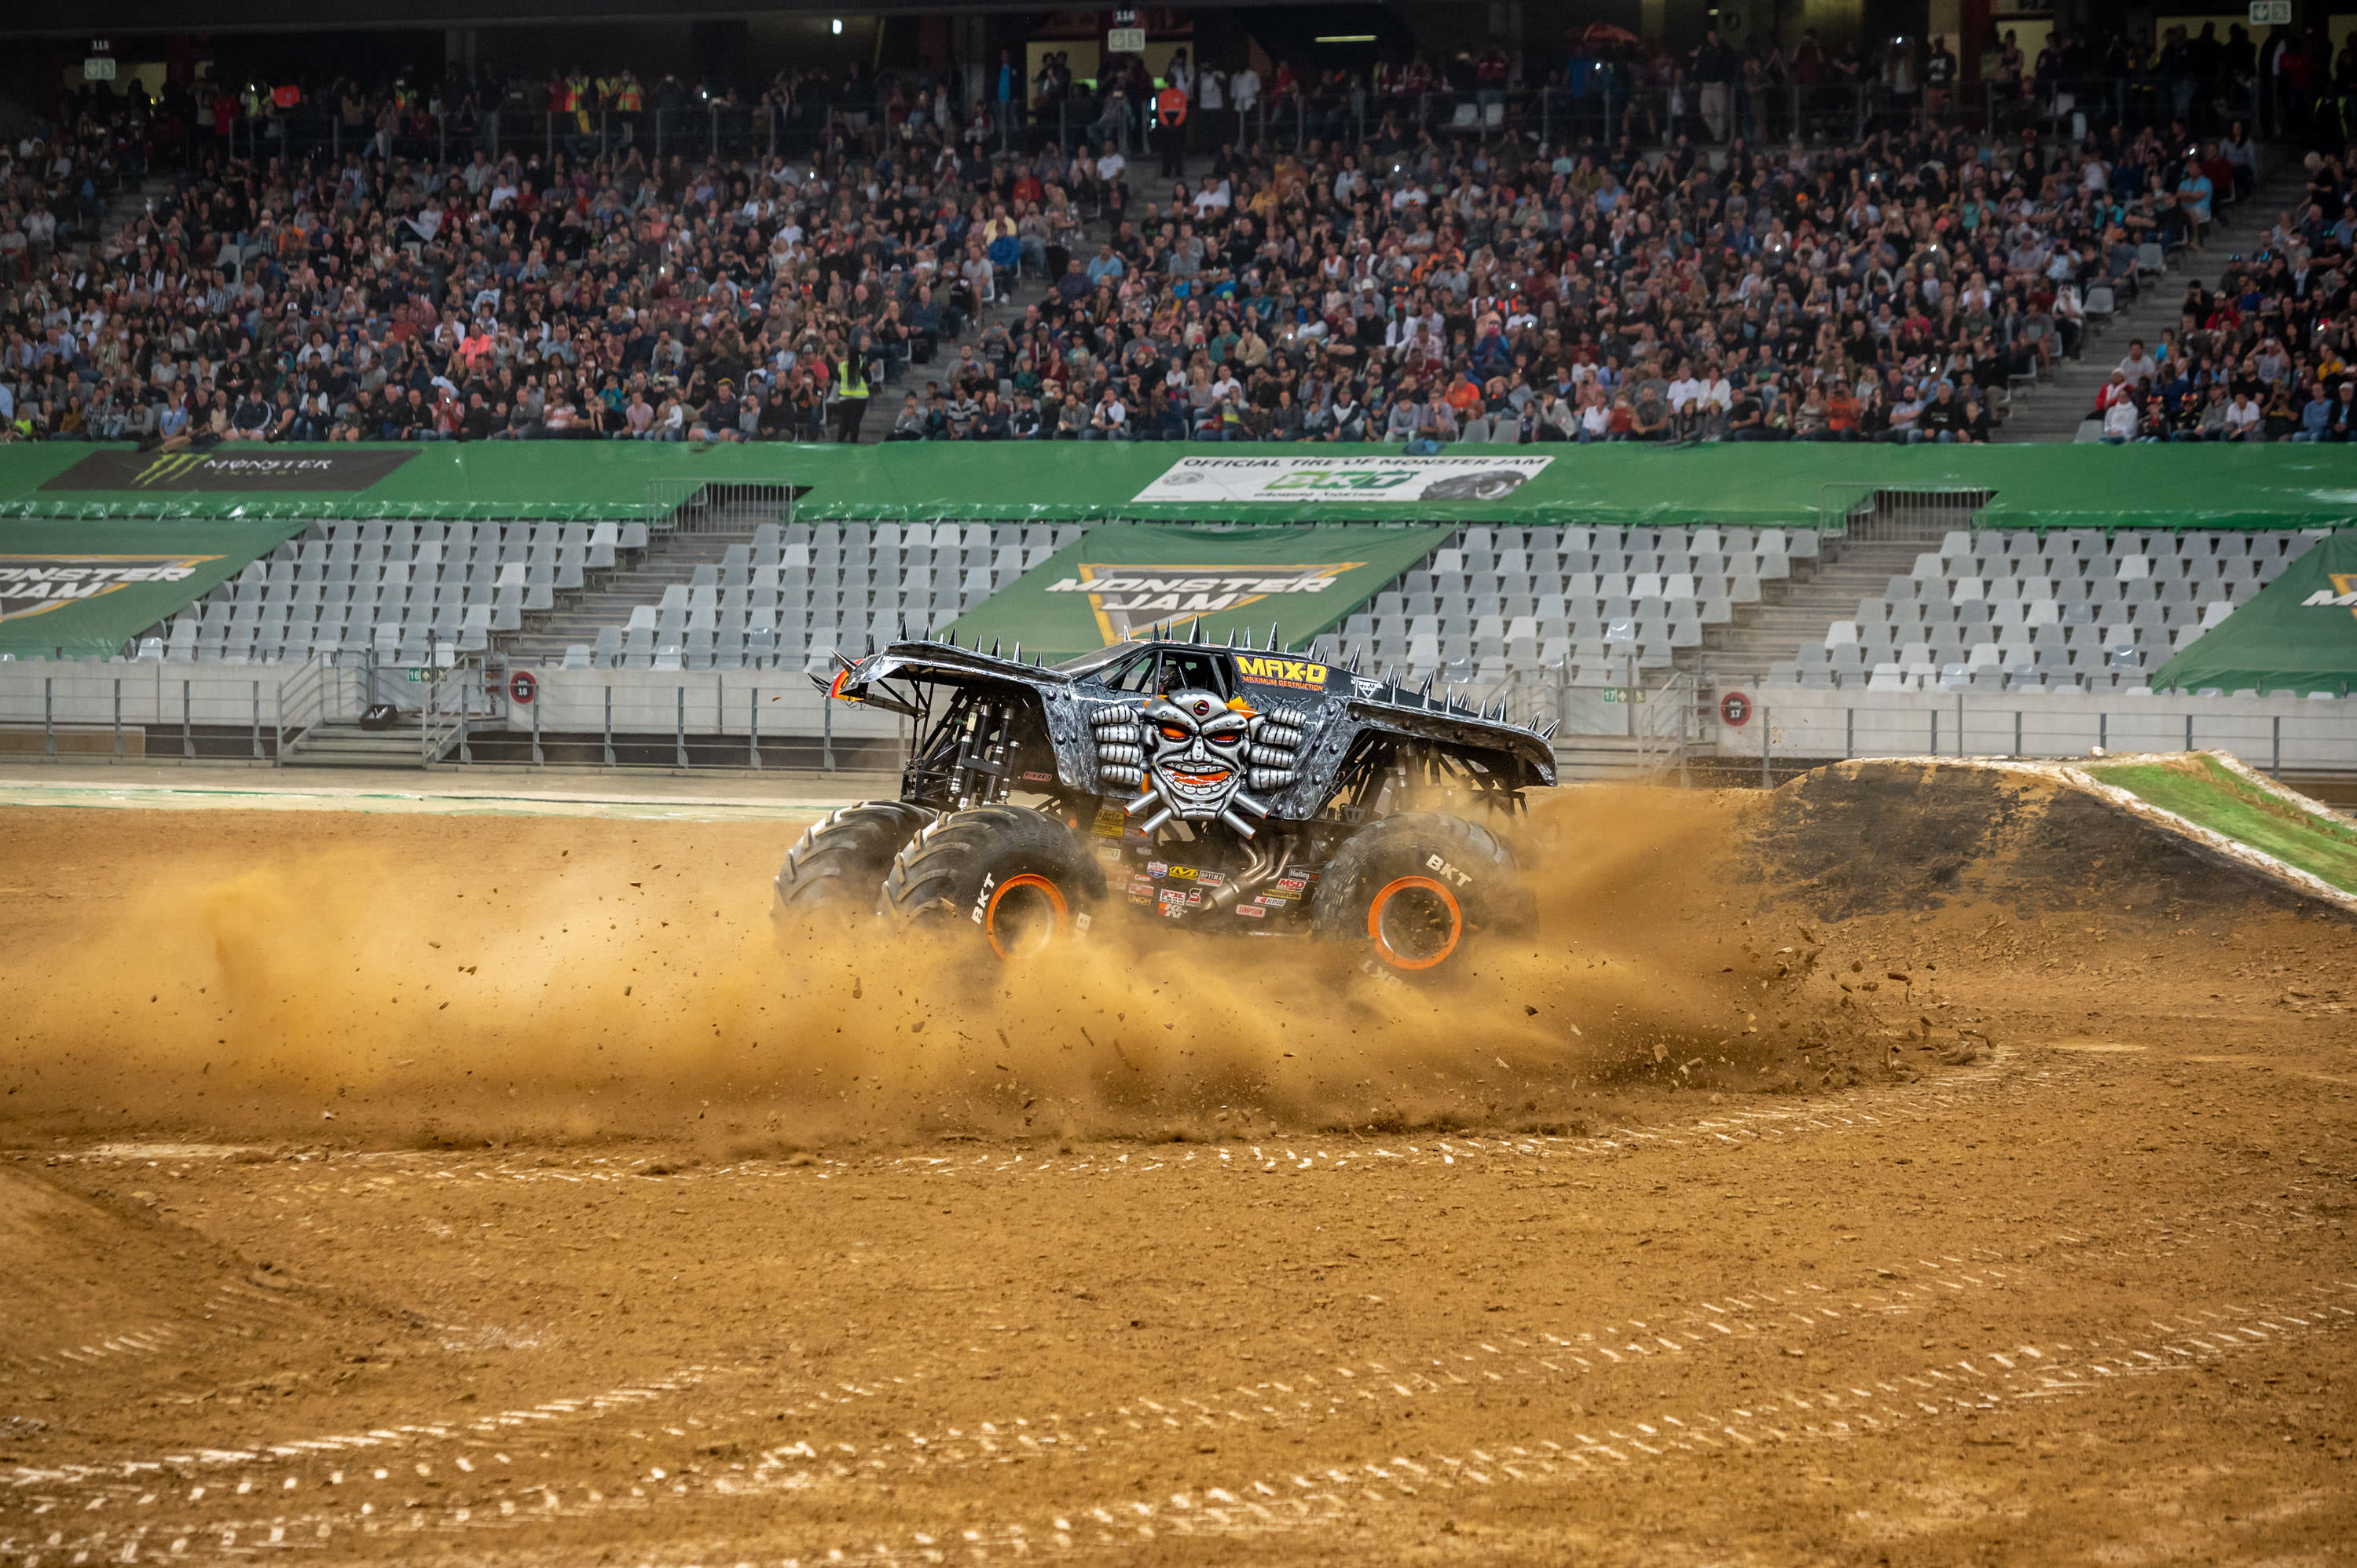 Fire Up the Engines with Monster Jam®